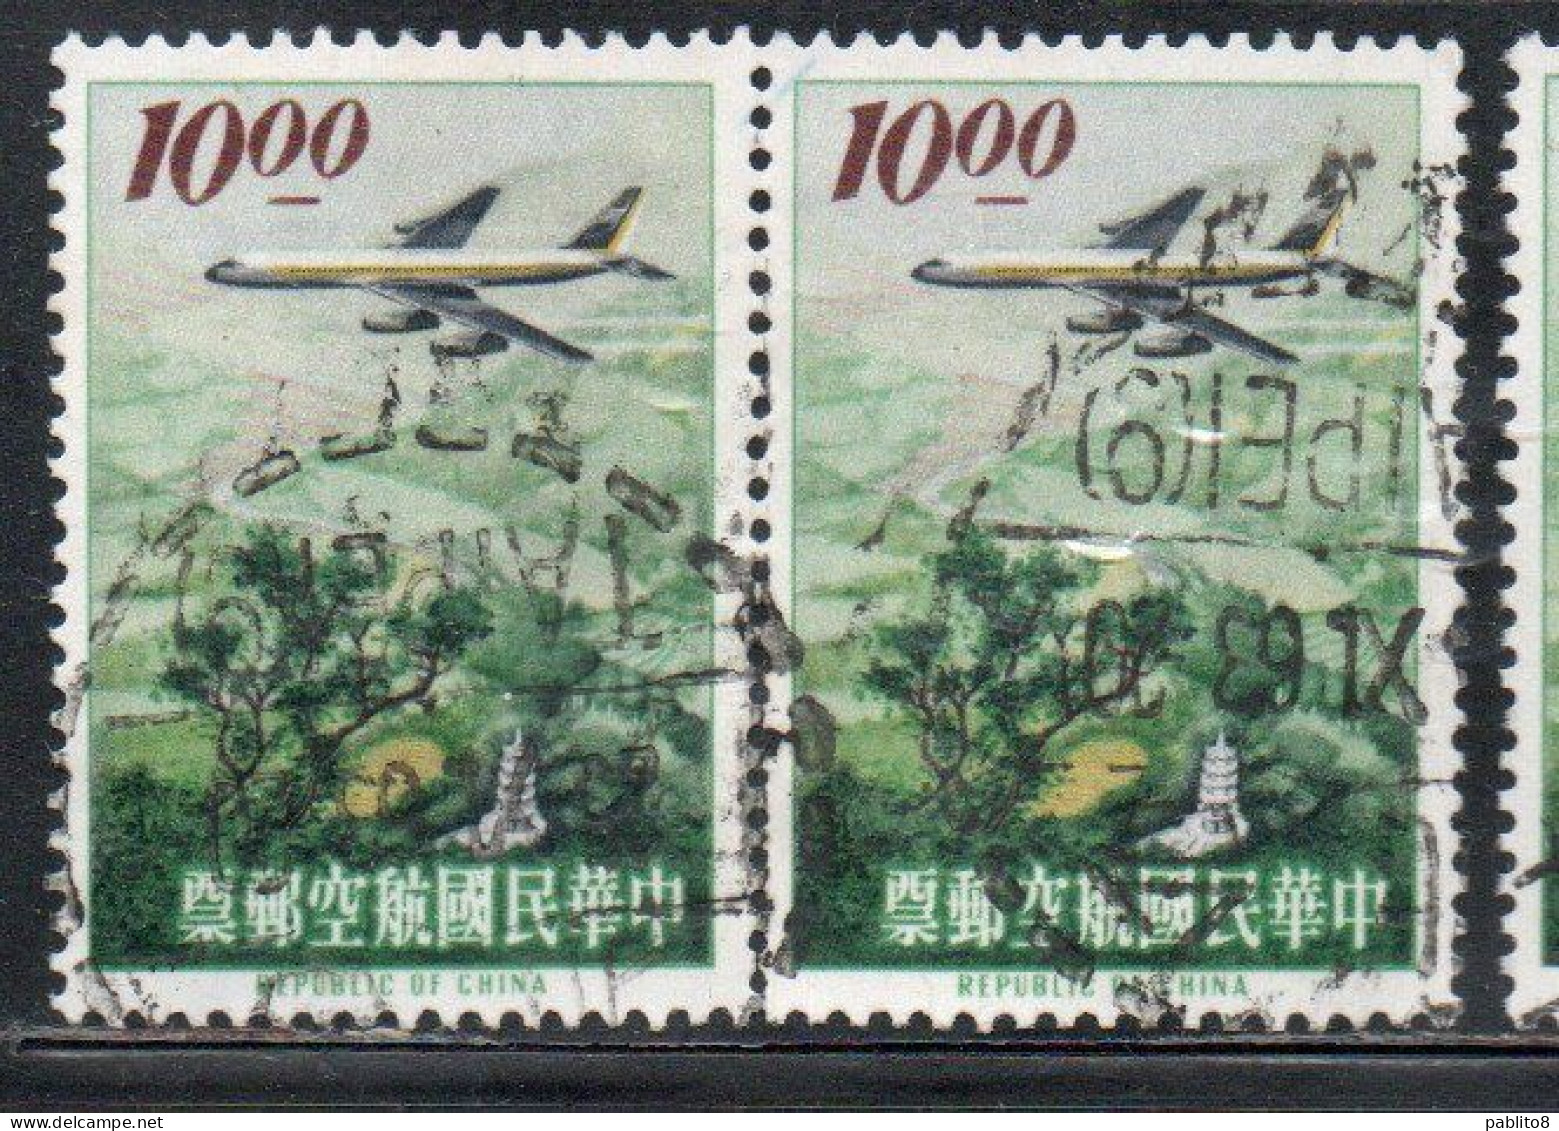 CHINA REPUBLIC CINA TAIWAN FORMOSA 1963 AIR POST MAIL AIRMAIL JET OVER LION HEAD MOUNTAIN SINCHU 10$ USED USATO OBLITERE - Corréo Aéreo